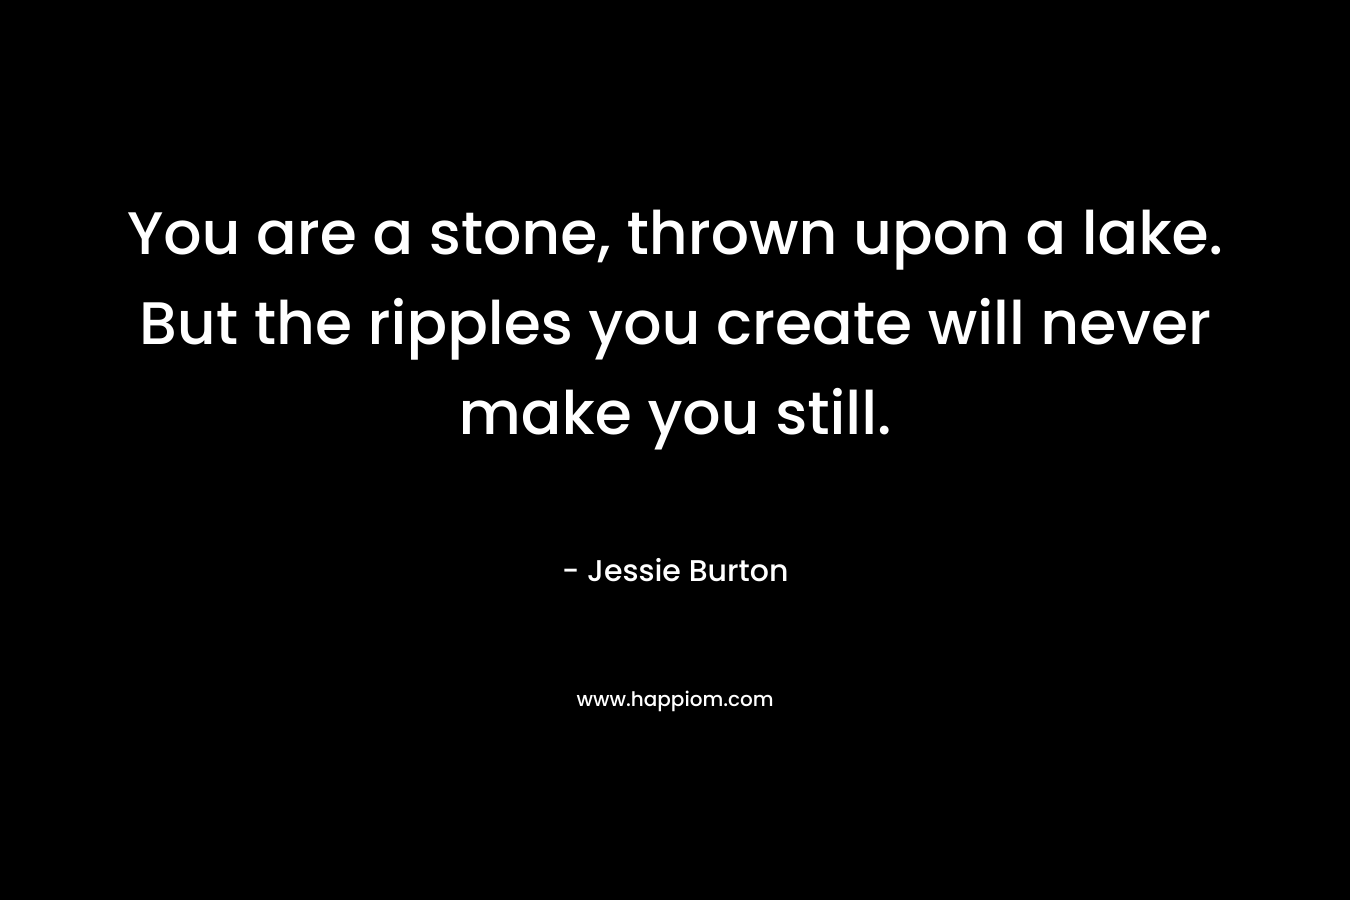 You are a stone, thrown upon a lake. But the ripples you create will never make you still. – Jessie Burton